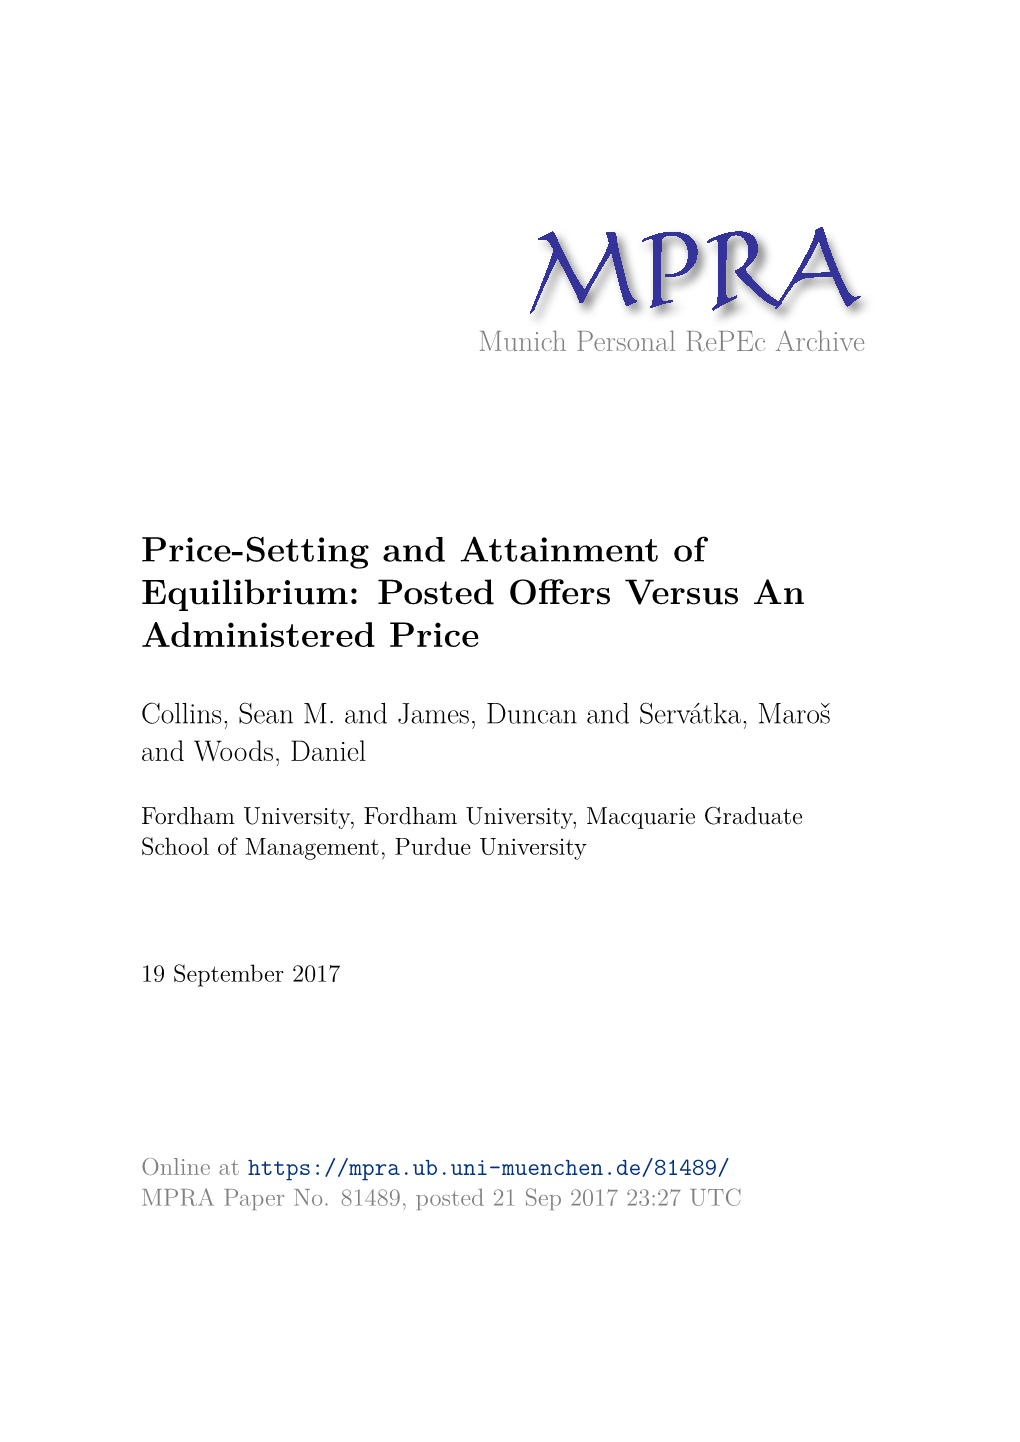 Price-Setting and Attainment of Equilibrium: Posted Oﬀers Versus an Administered Price